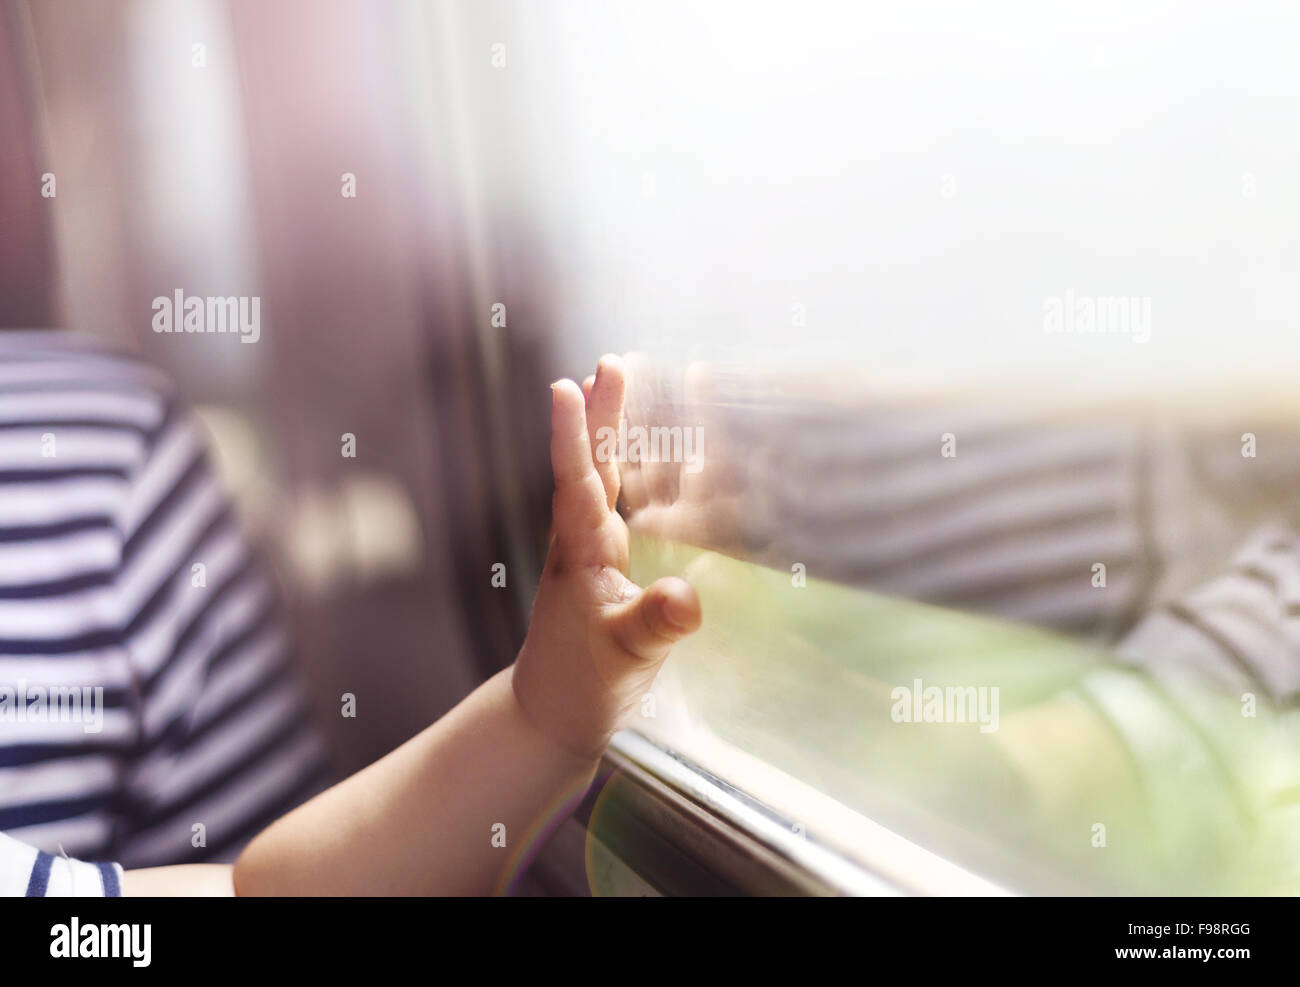 Boy travelling in retro train. He is touching the window. Stock Photo